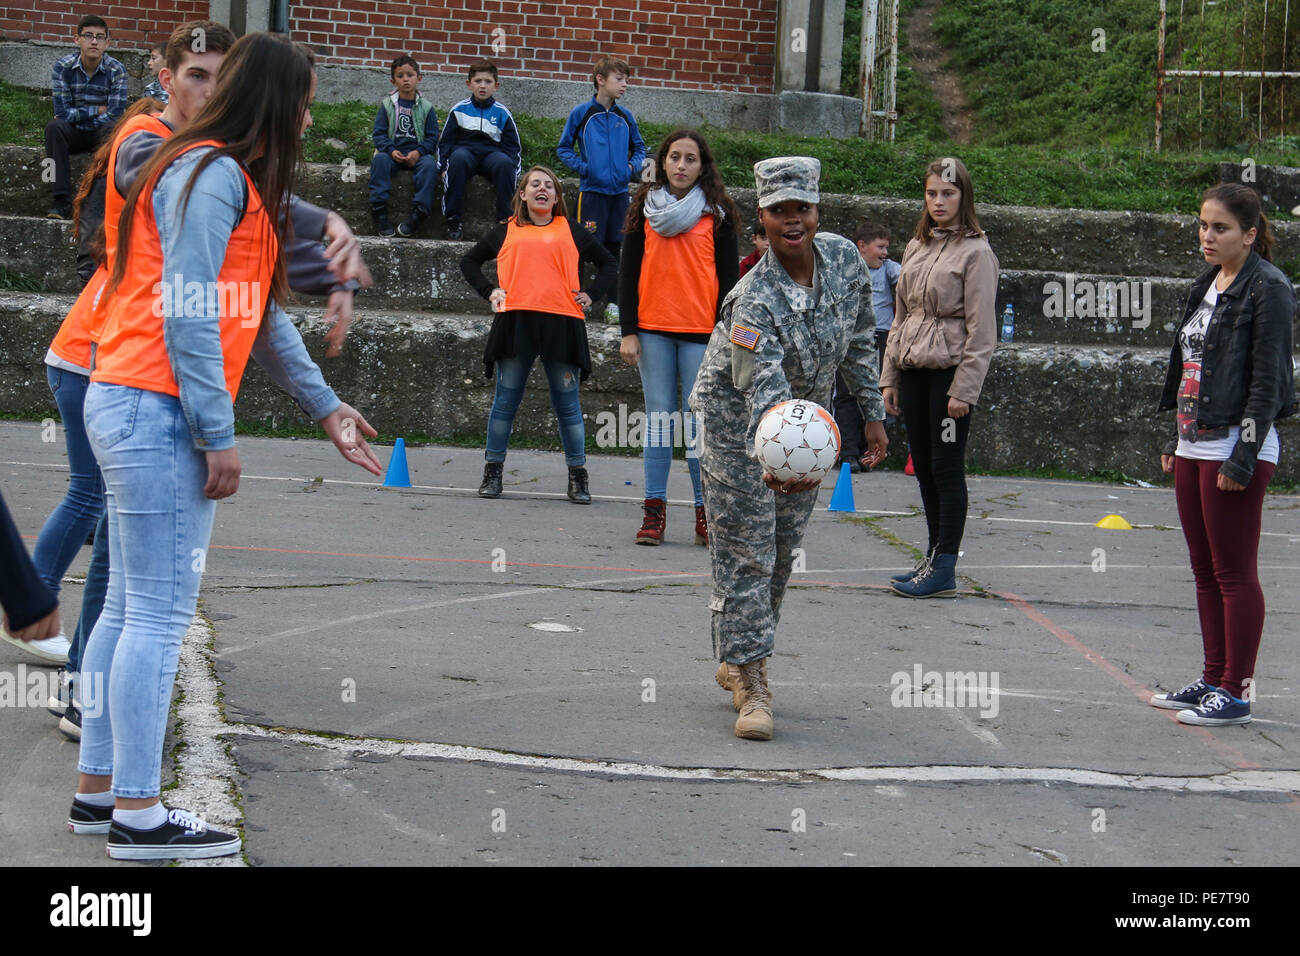 Sgt. Travanda Burton, a U.S. Army Reserve Soldier deployed to Kosovo with the 345th Combat Support Hospital, throws a soccer ball for a group of students attending a Violence Free Future youth tolerance event Oct. 17, 2015, in Kacanik, Kosovo, as part of a game used to mimic real-life situations involving stereotypes. Burton and several other Multinational Battle Group-East members volunteered their free time to lead the games, which aim to promote pro-social behavior among Kosovo’s youth. (U.S. Army photo by Staff Sgt. Mary Junell, Multinational Battle Group-East) Stock Photo